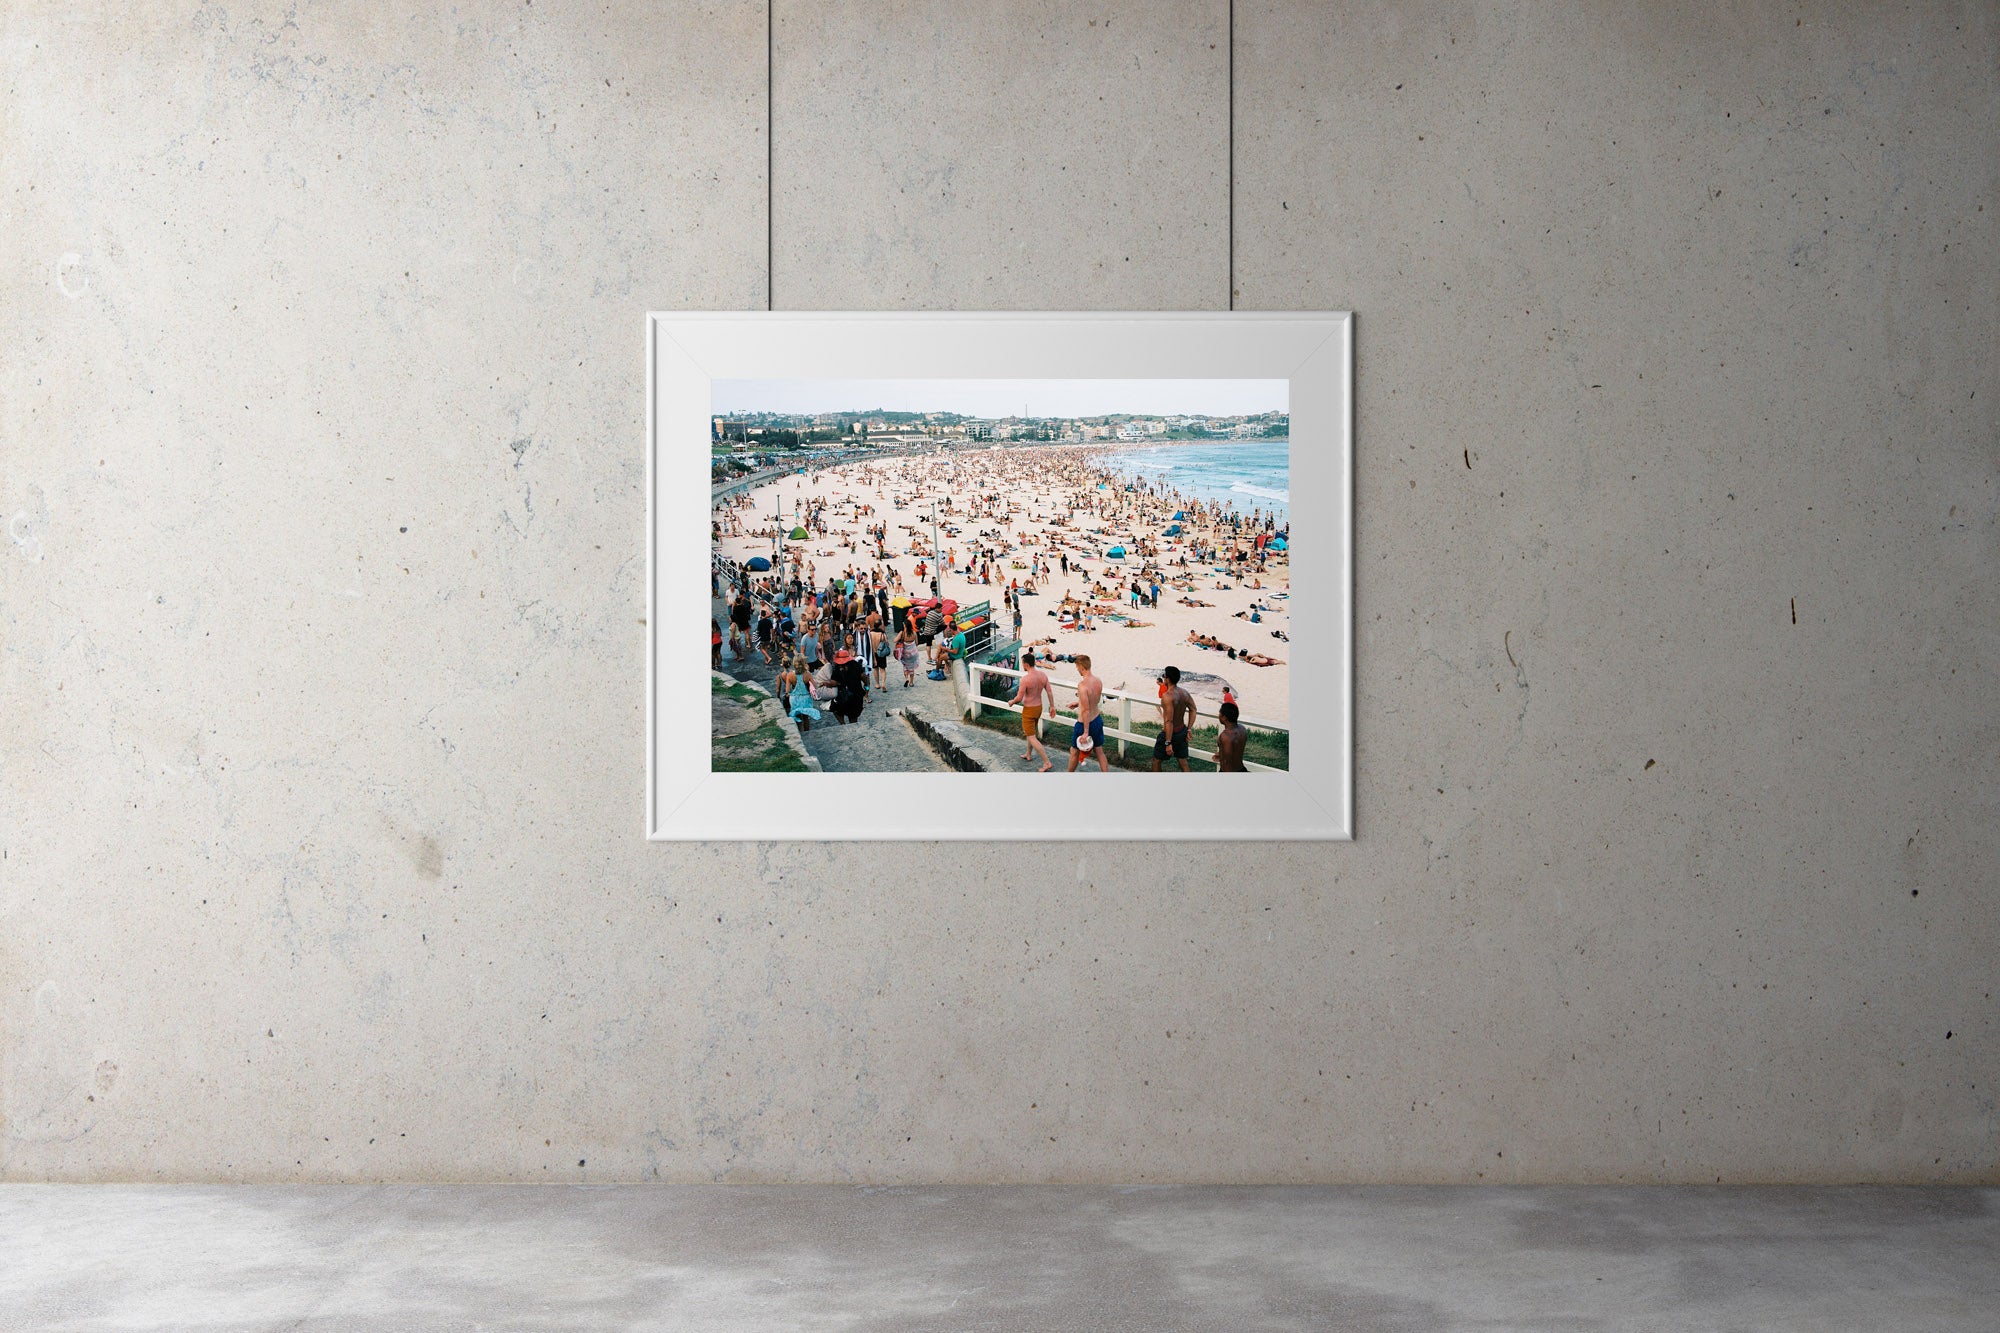 “A photo of New Years day at Bondi Beach, Thousands of people on the beach & in the water. People cue to have a shower in a long line. People are wearing bathers, it’s a hot day in Sydney Australia”.  Artwork Prints, wall art,  travel Australia, Photographic prints,  Framed artwor,k Beach, Photography Photography for sale Film photography Vintage photo style,  Interior design, Film photography, film photography, Bondi beach Sydney, Street photography prints,